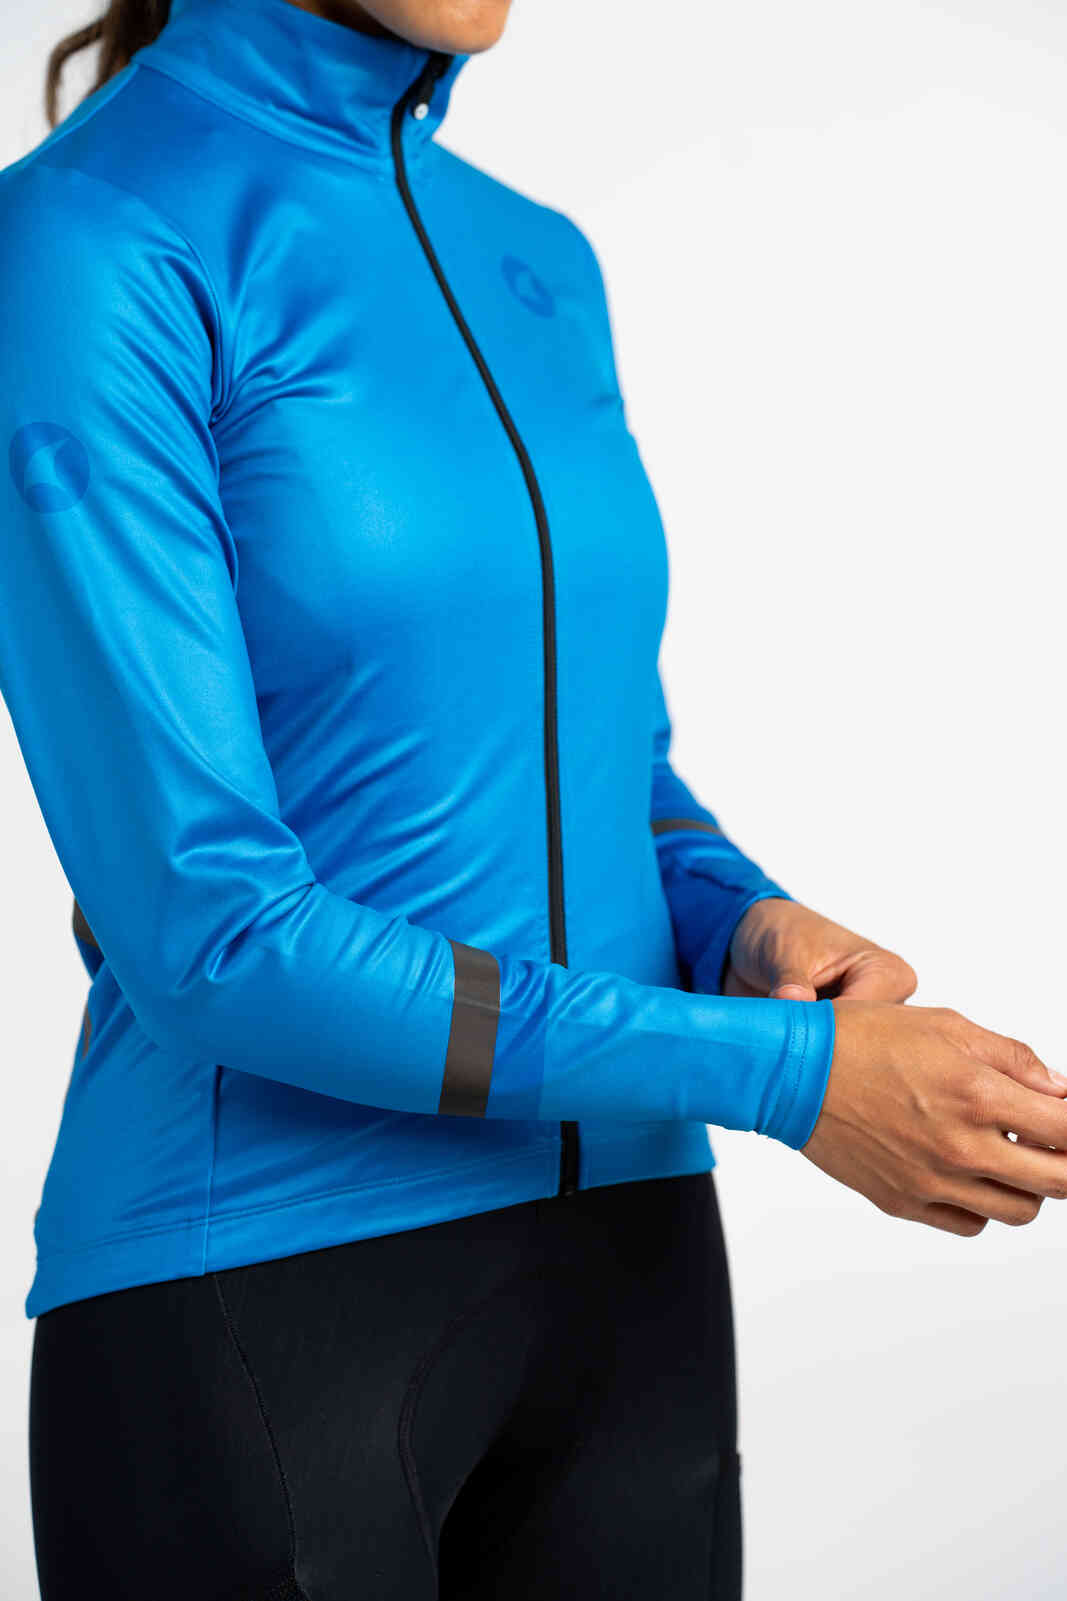 Women's Blue Thermal Cycling Jersey - Reflective Sleeves